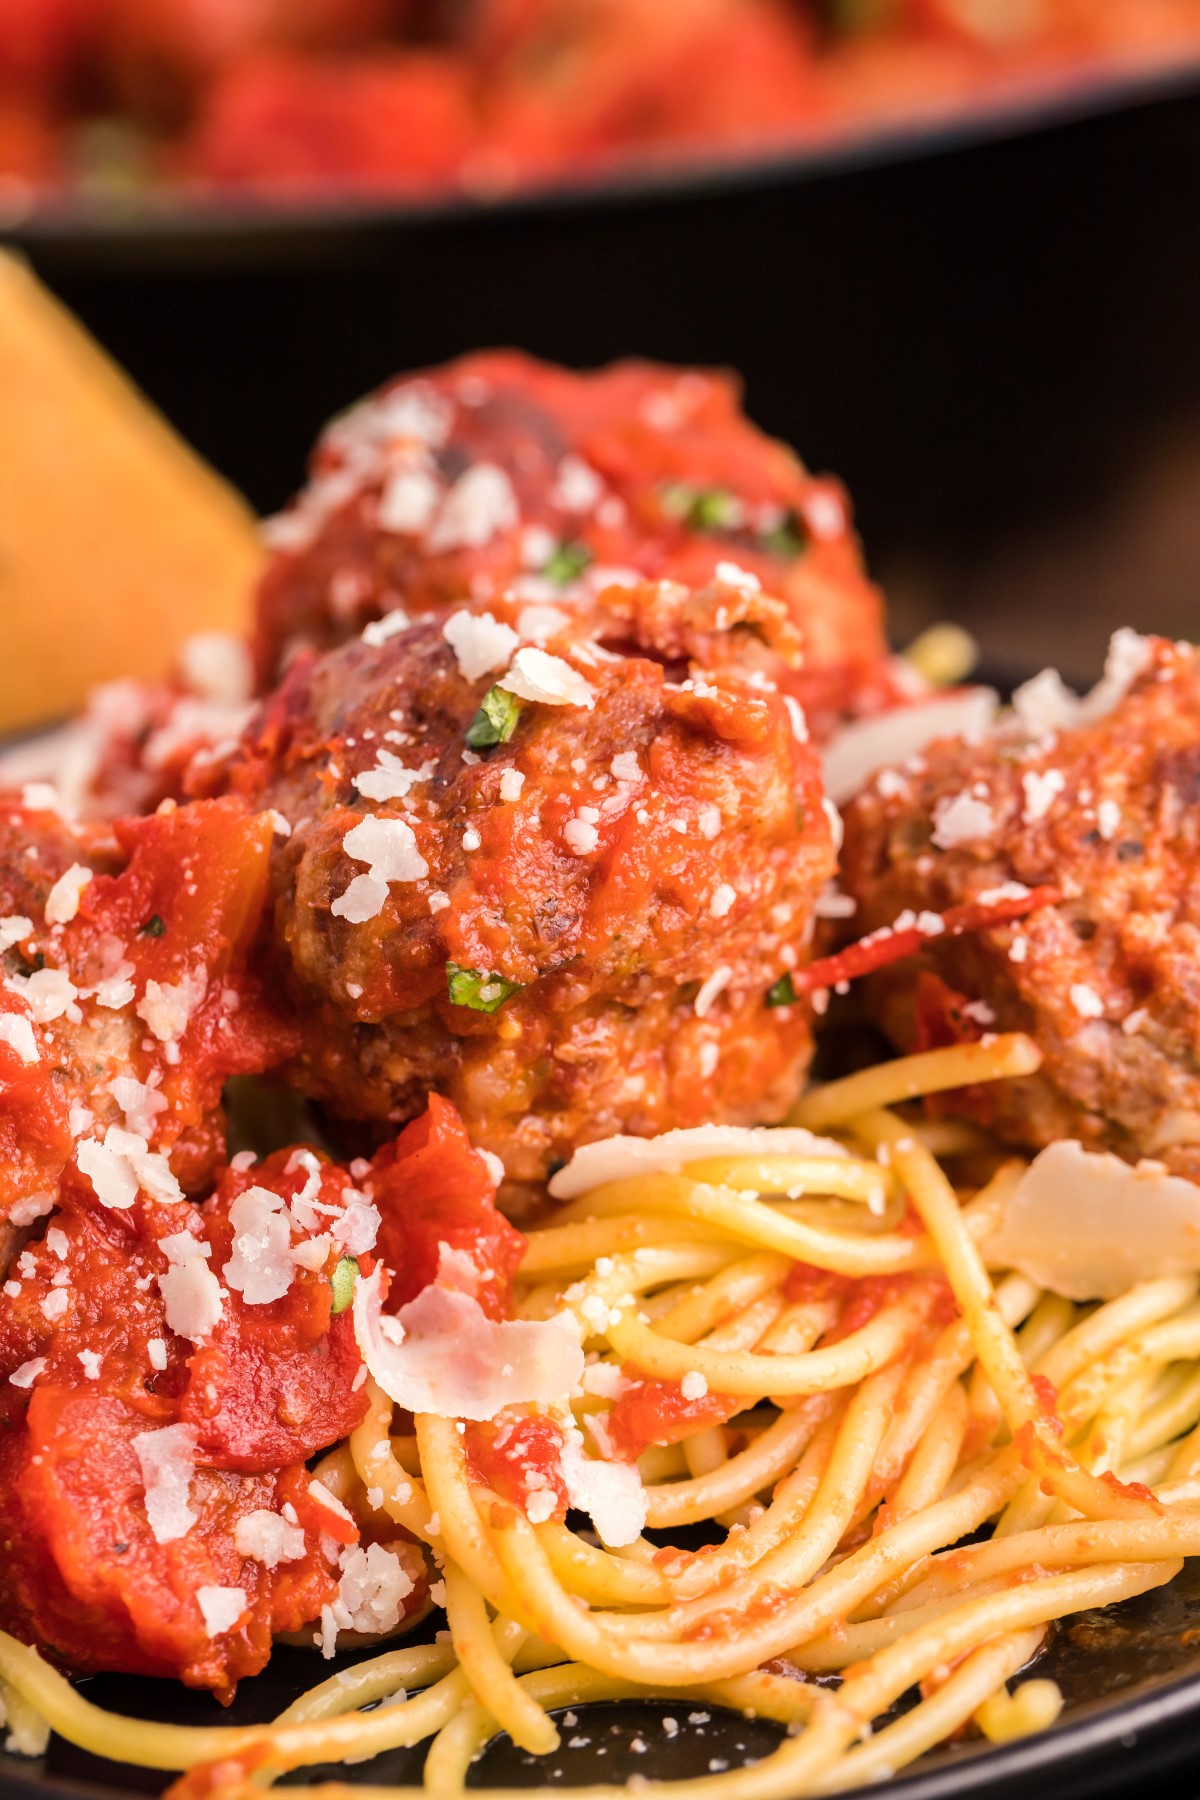 Smoked meatballs and tomato sauce on top of a plate of spaghetti garnished with parmesan cheese.